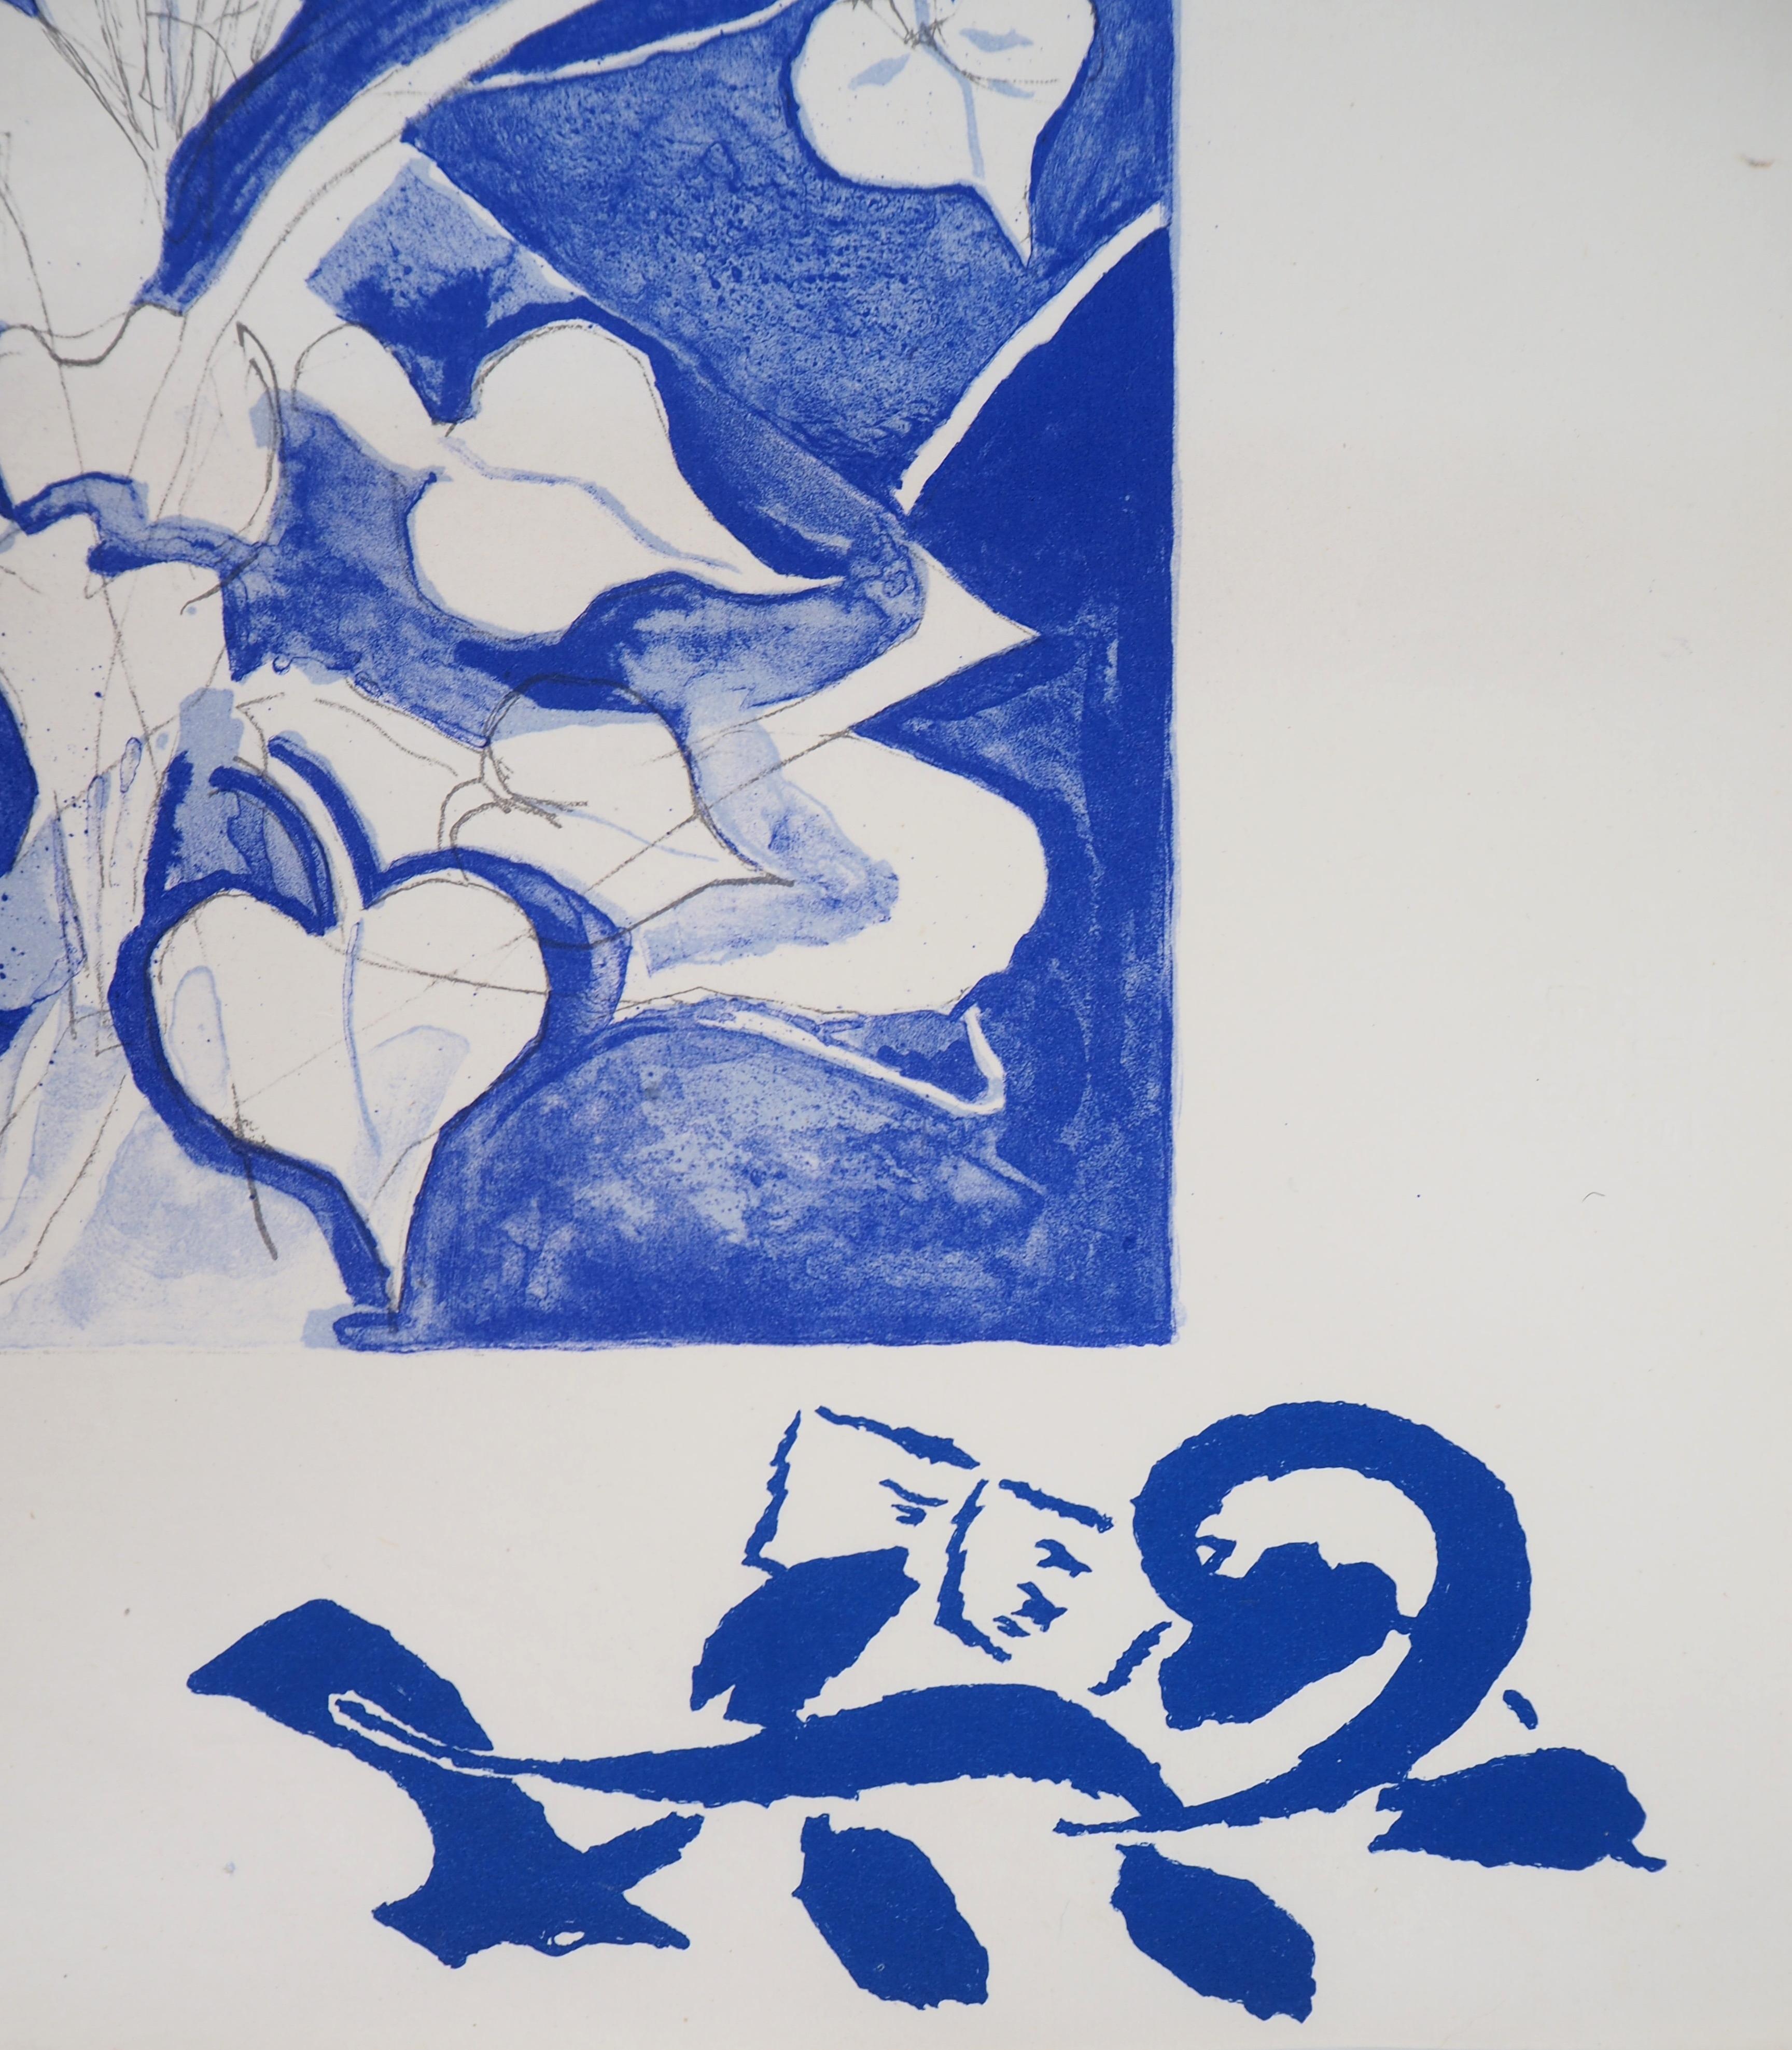 Georges BRAQUE
Garden in blossom, 1955

Original lithograph in colour
Hand signed and printed signature in the plate
Numbered / 12 copies 
On the Chinese paper 44 x 32 cm (c. 17,3 x 12,6 in)

Authentified by the blind stamp of the aditor